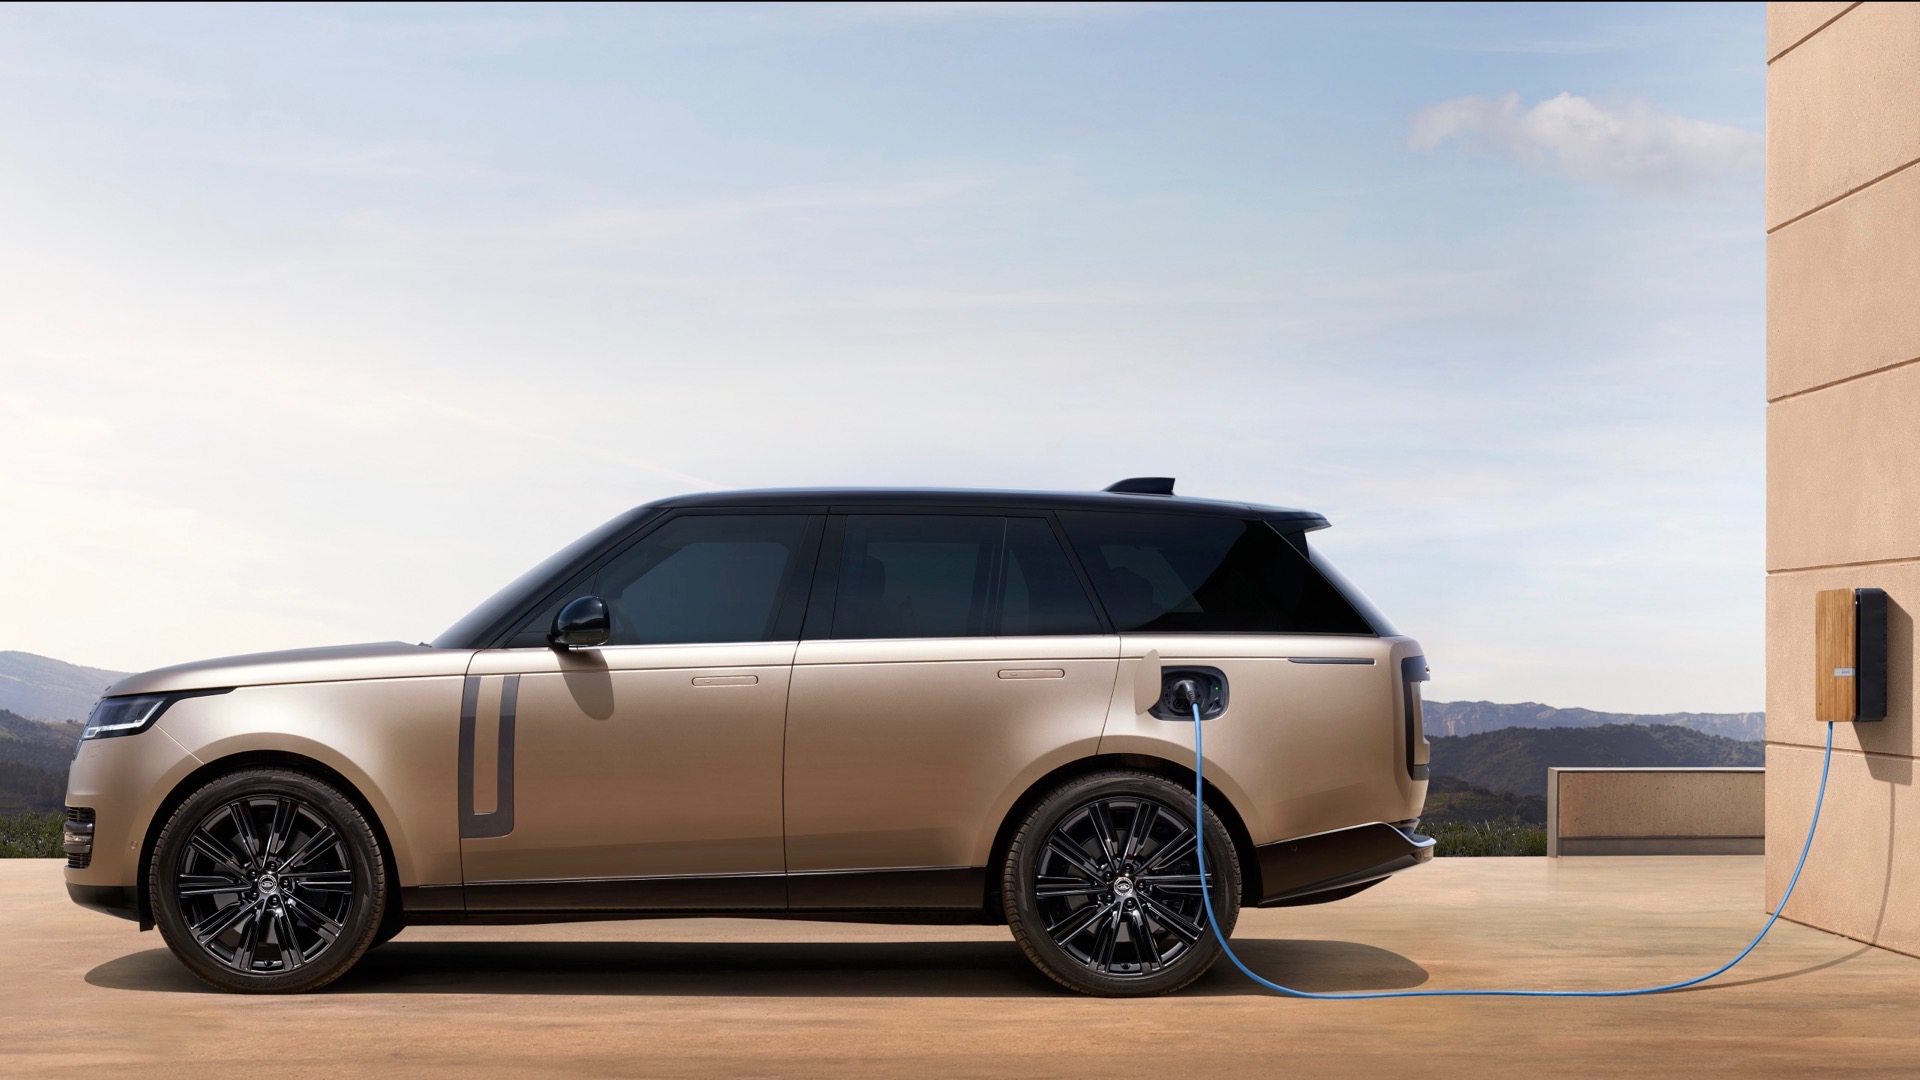 2023 Range Rover P440e: 48 electric miles expected for plug-in hybrid, $106,250 starting price 2023 Range Rover P440e: 48 electric miles expected for plug-in hybrid, $106,250 starting price